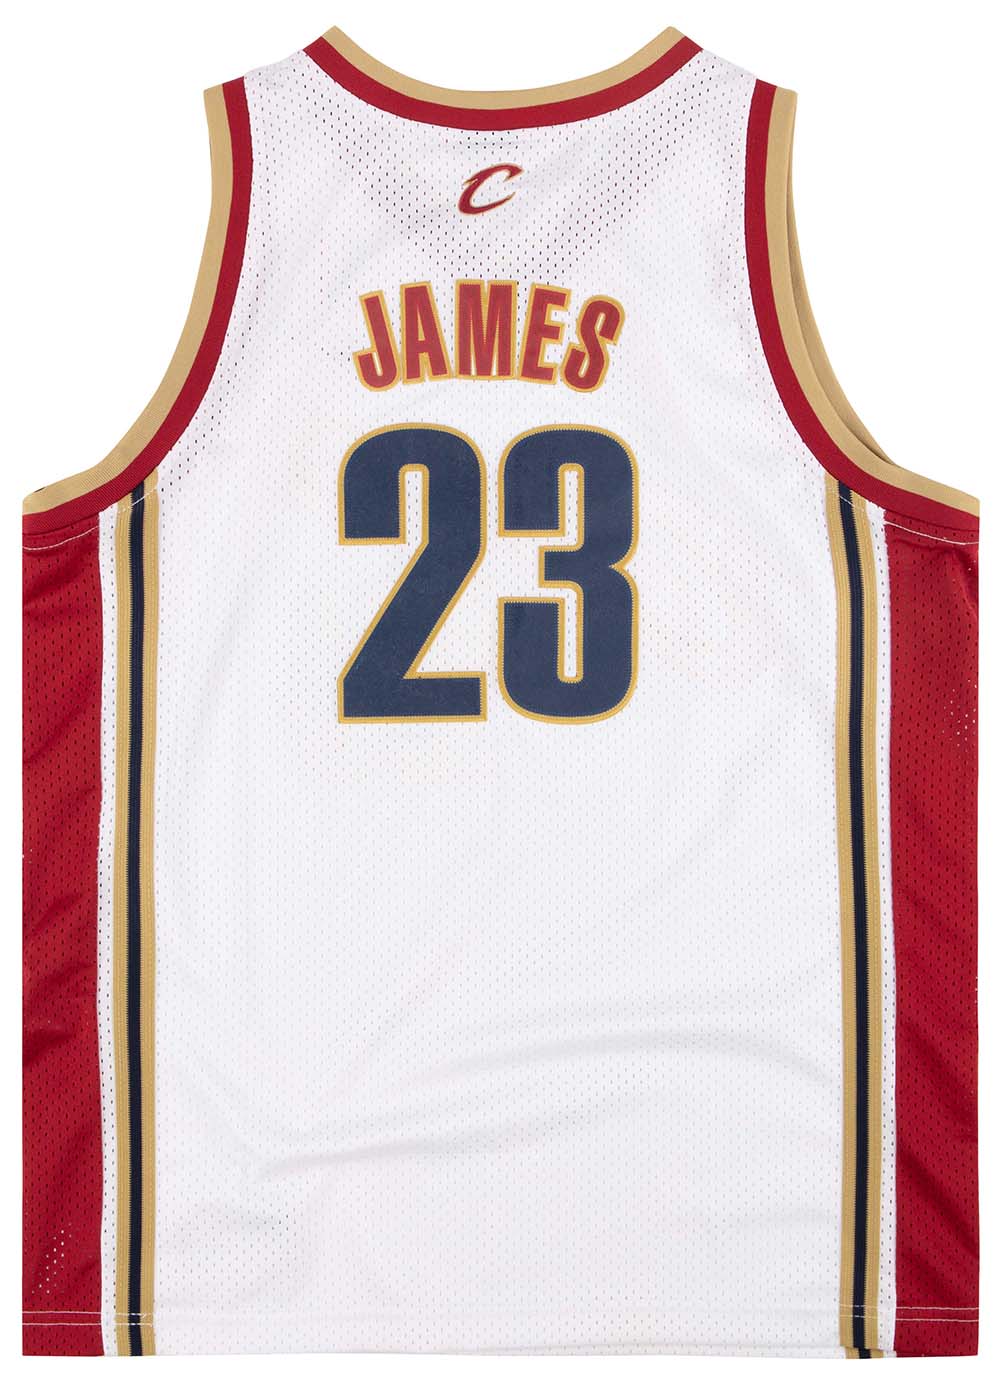 NBA Authentic Jersey Cleveland Cavaliers 2003-04 LeBron James #23